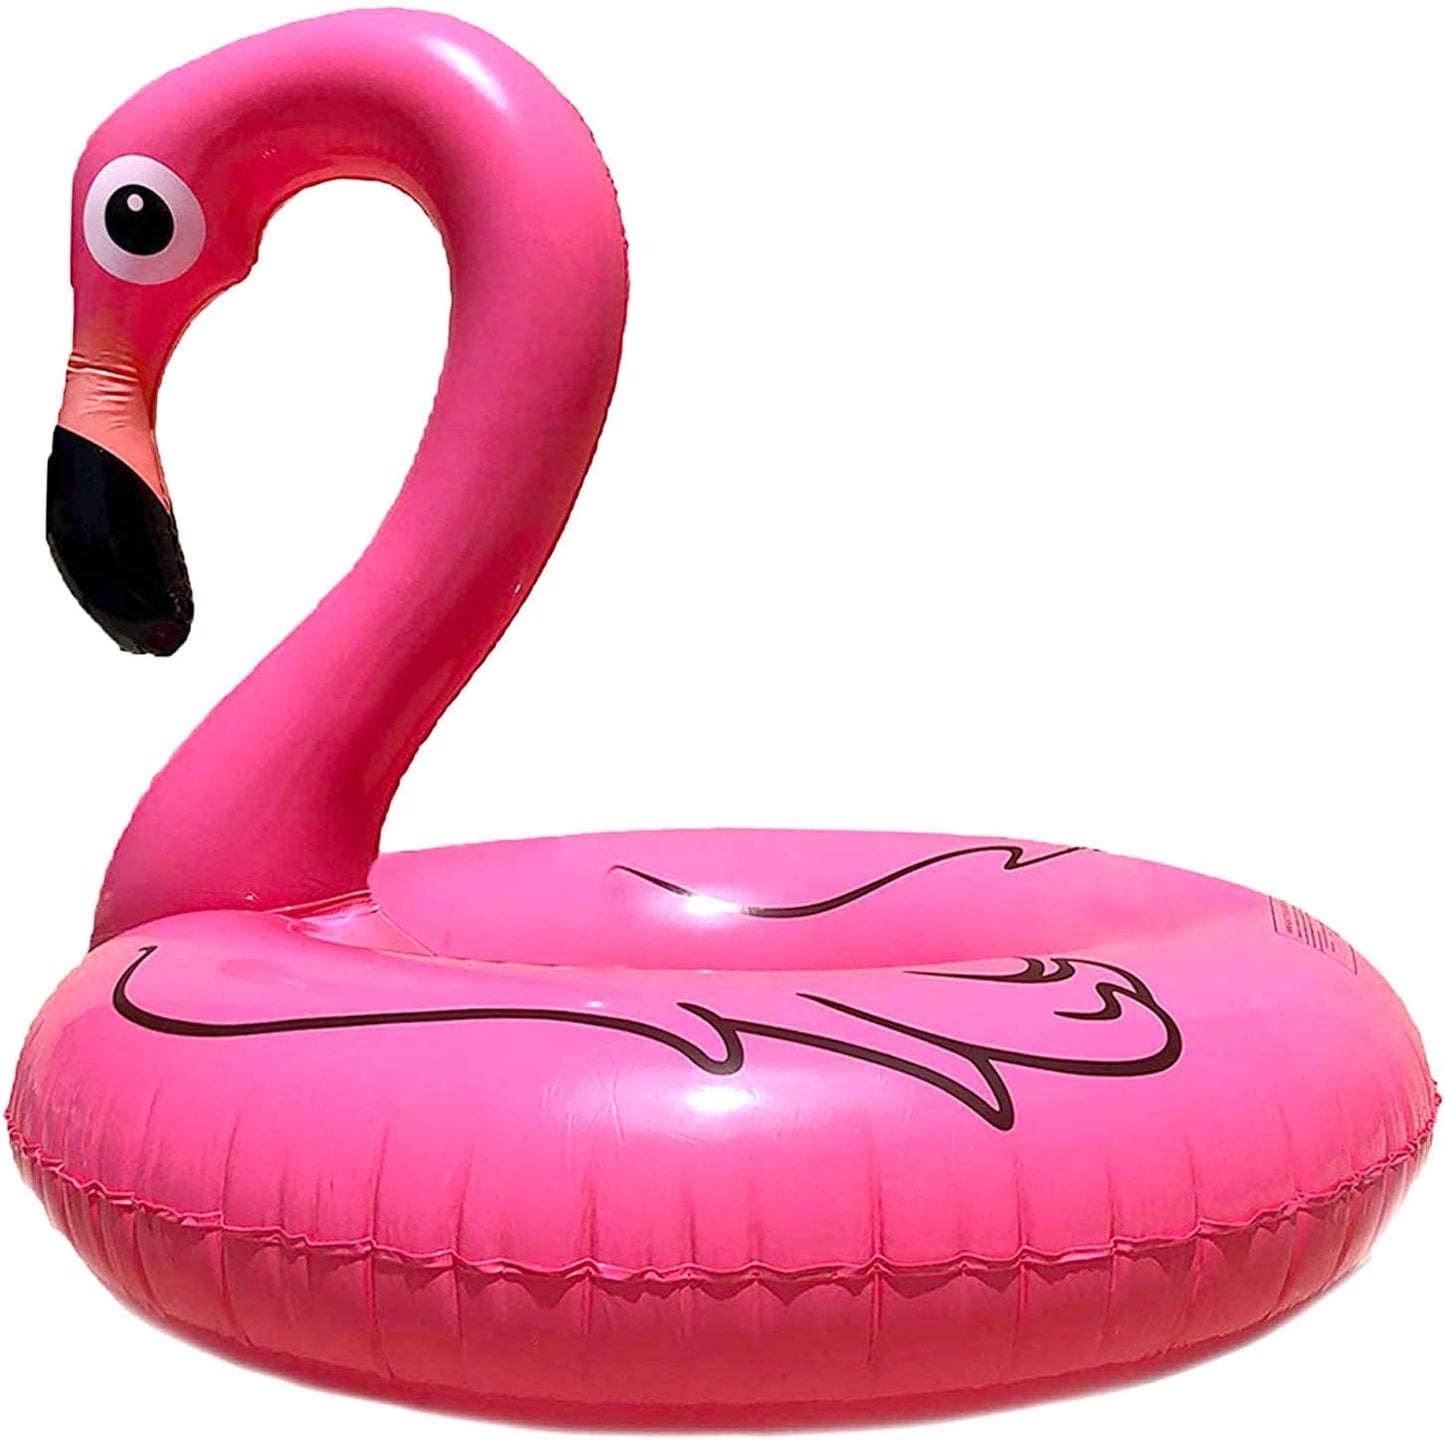 GIFTEXPRESS 48" Inflatable Flamingo Pool Float